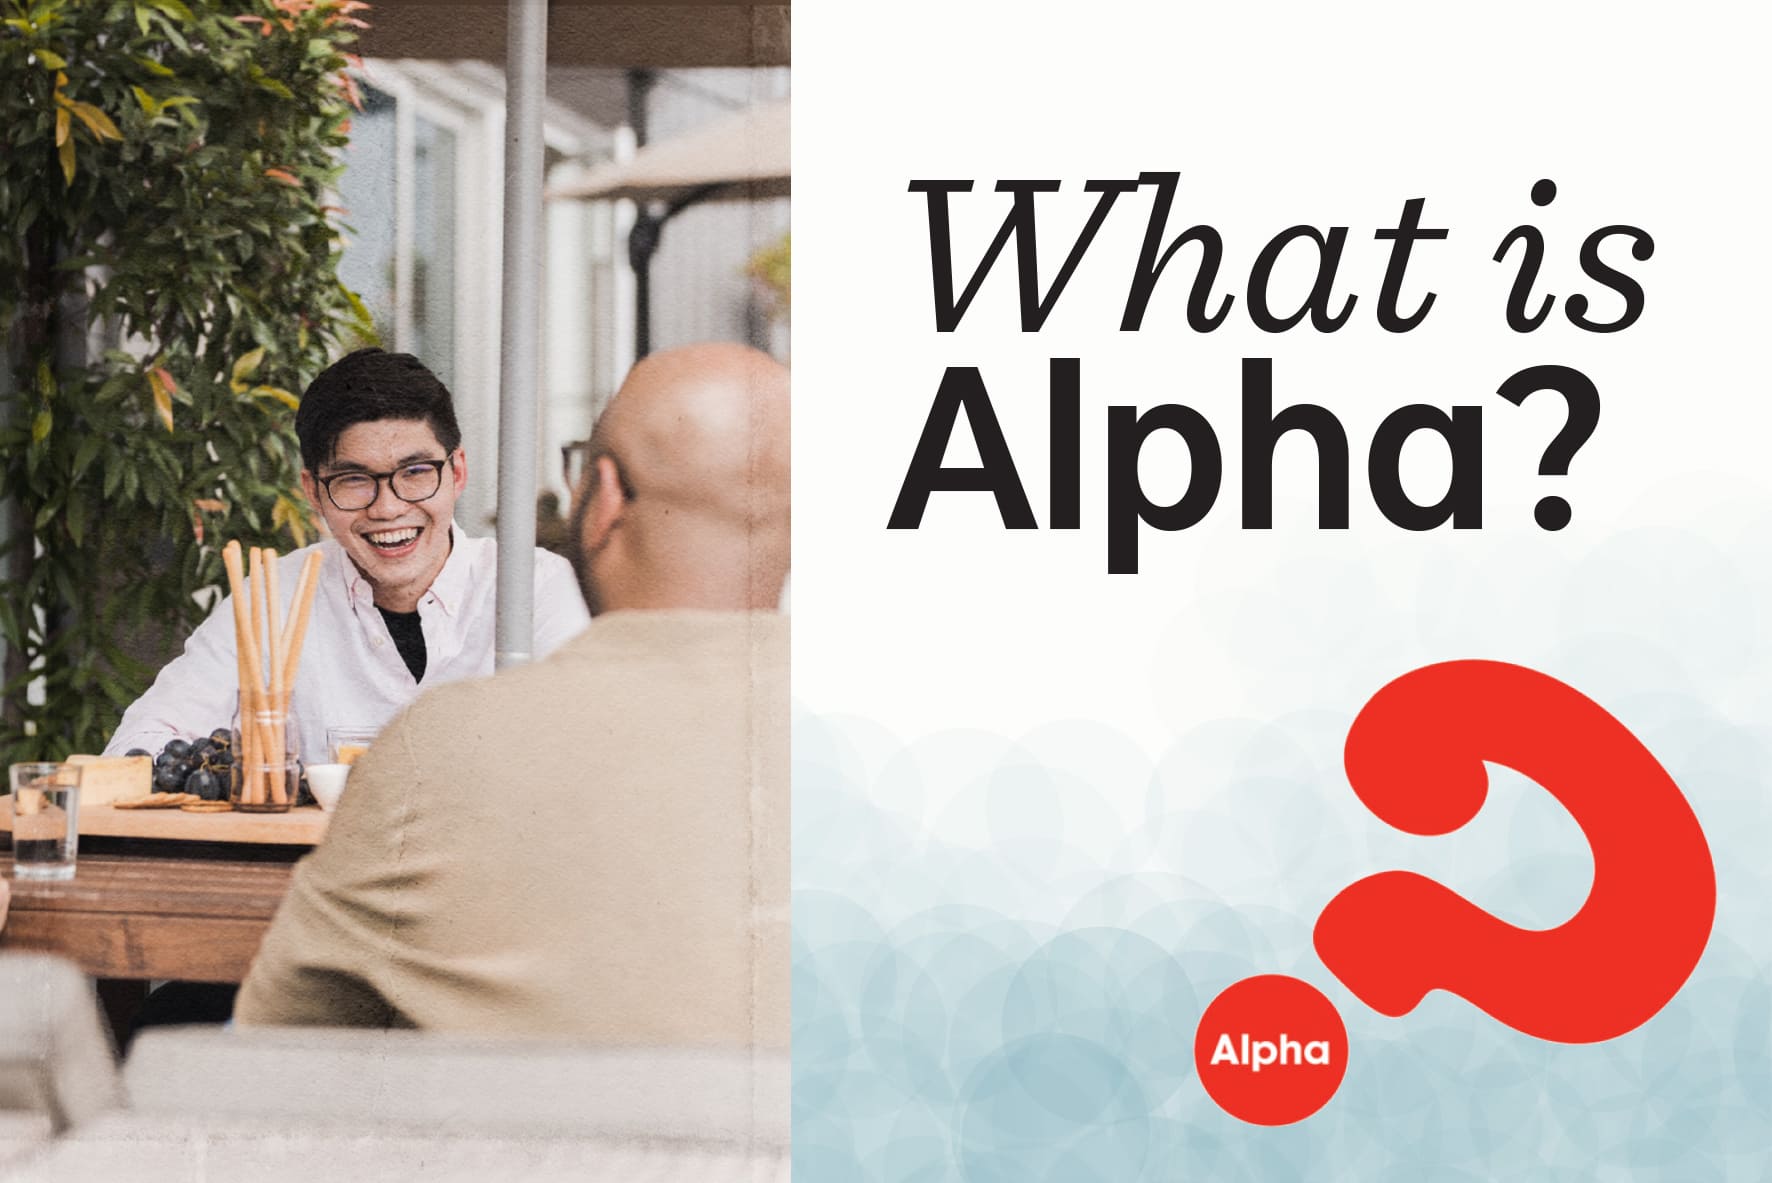 Whats is Alpha?